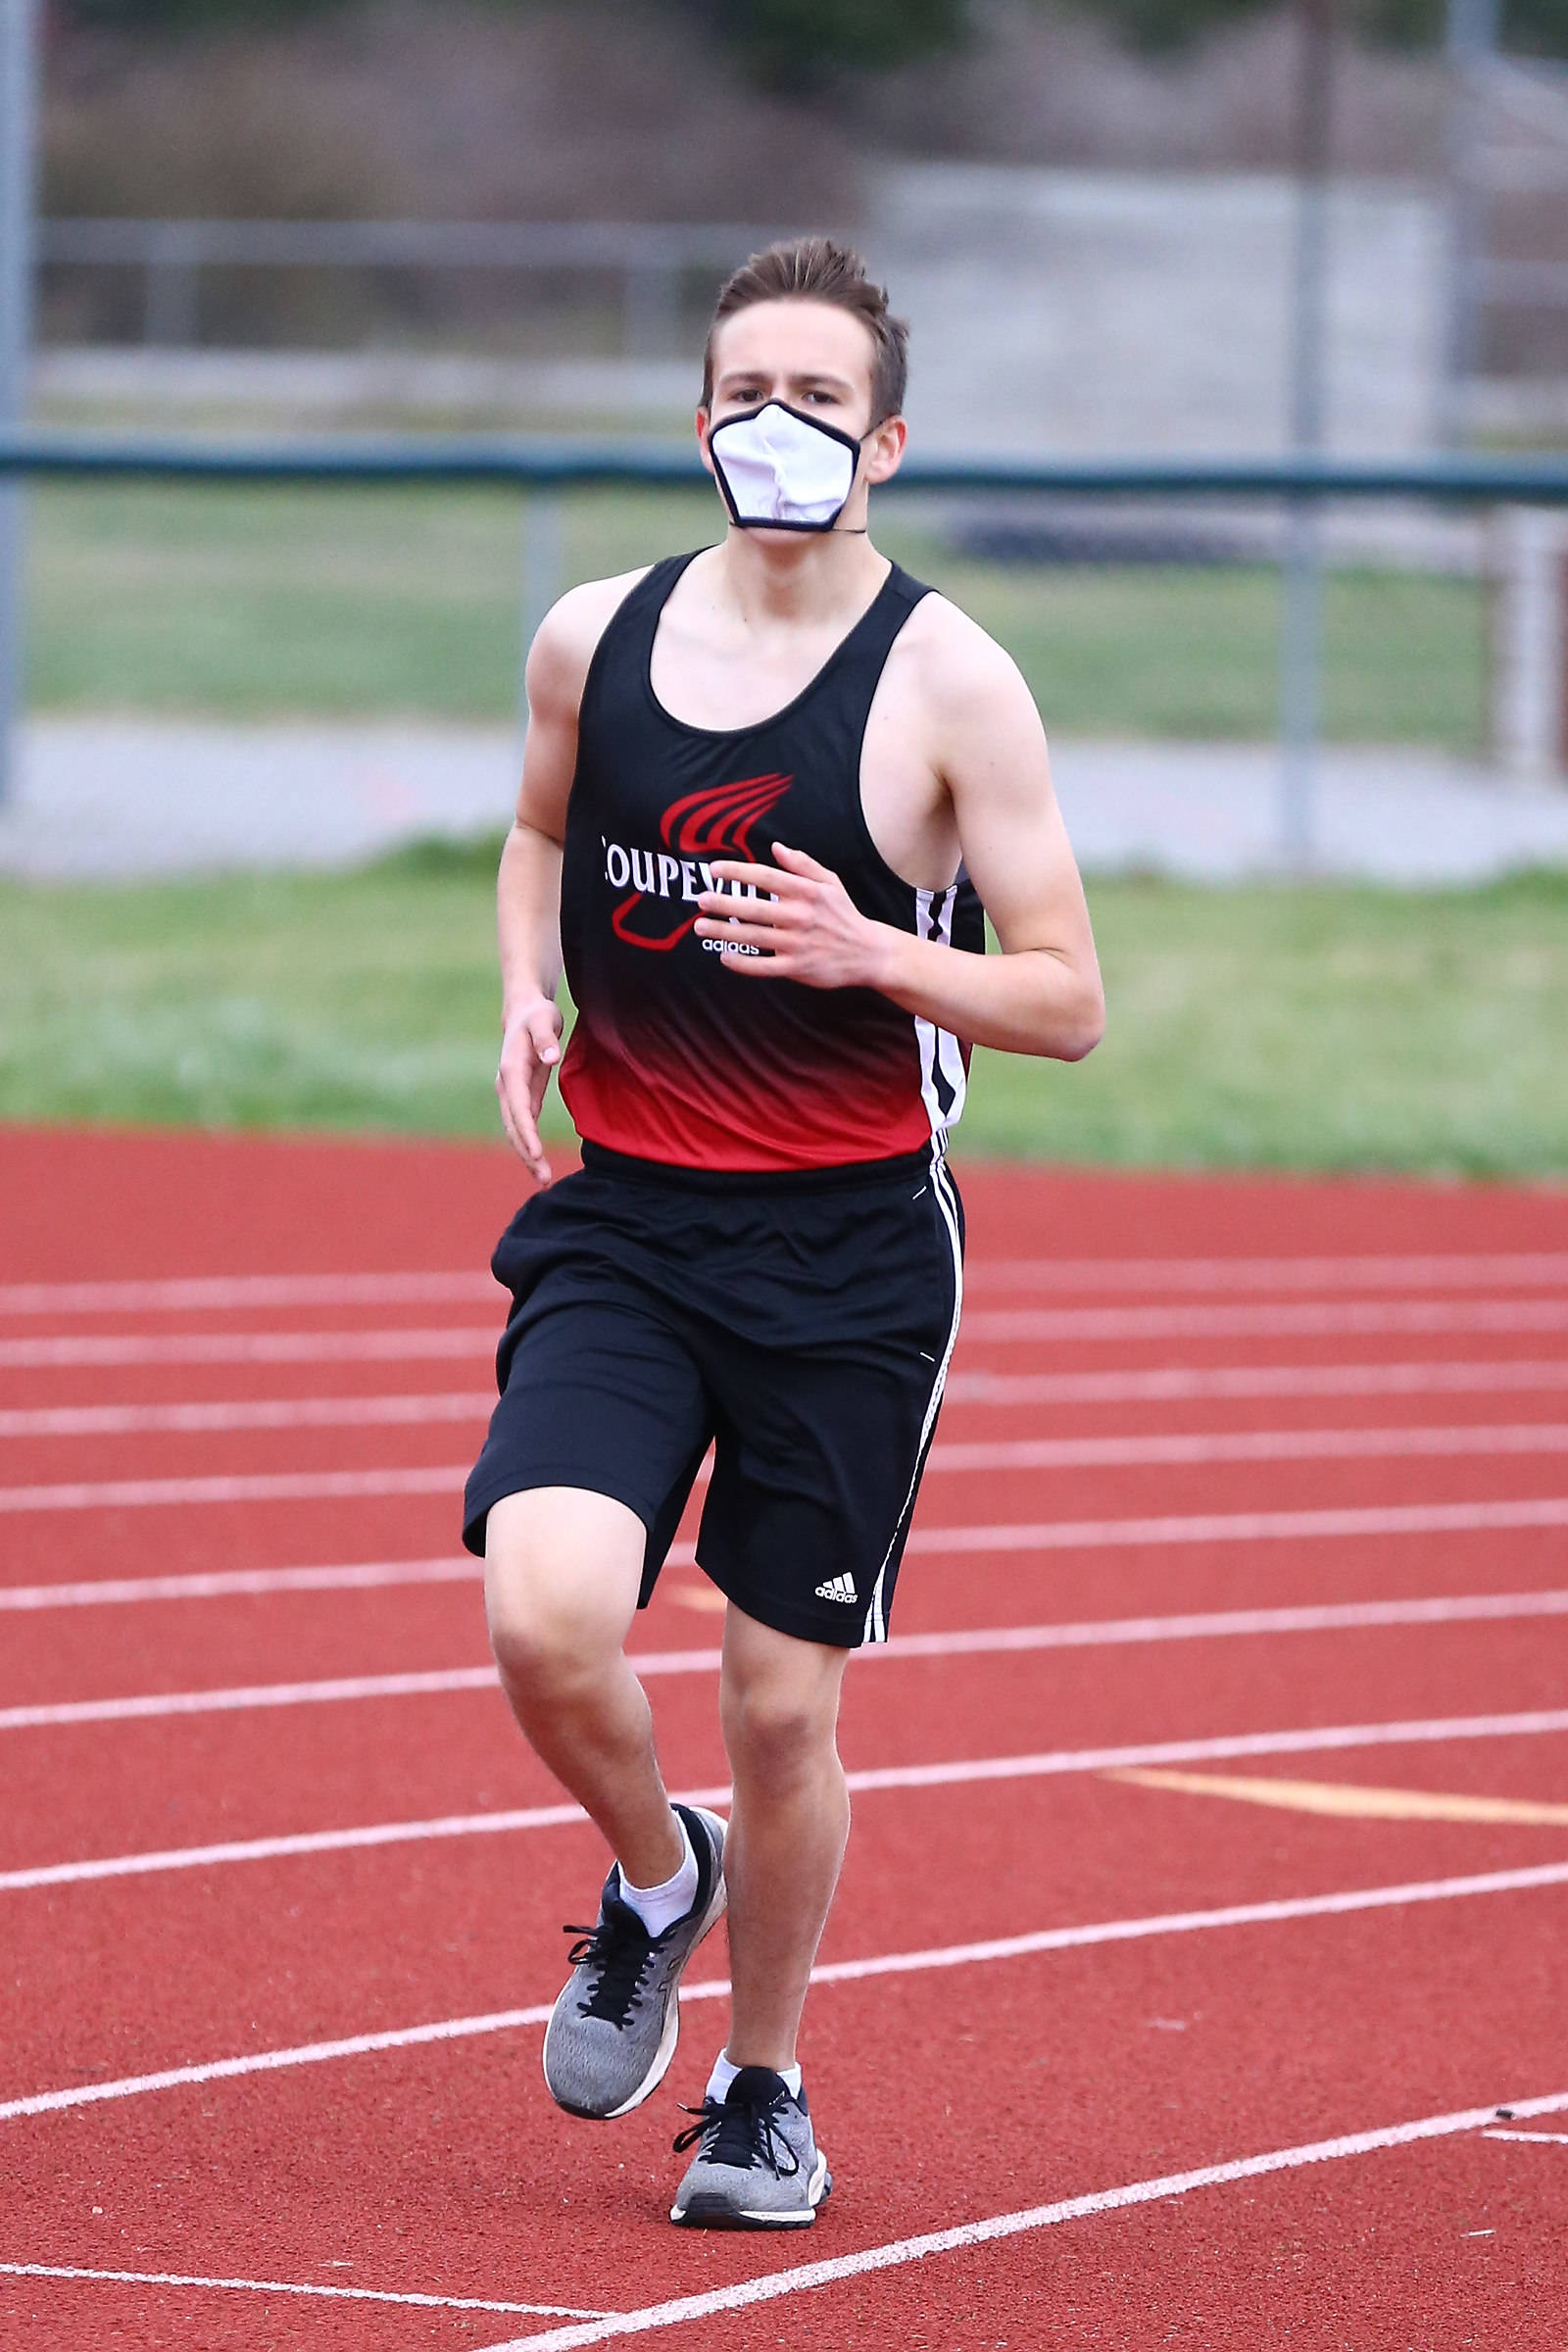 Coupeville Track - Photo by John Fisken
Coupeville's track and field team kicked off spring sports Thursday, March 4. The Wolves hosted the Northwest 2B/1B League season opener at Mickey Clark Stadium.